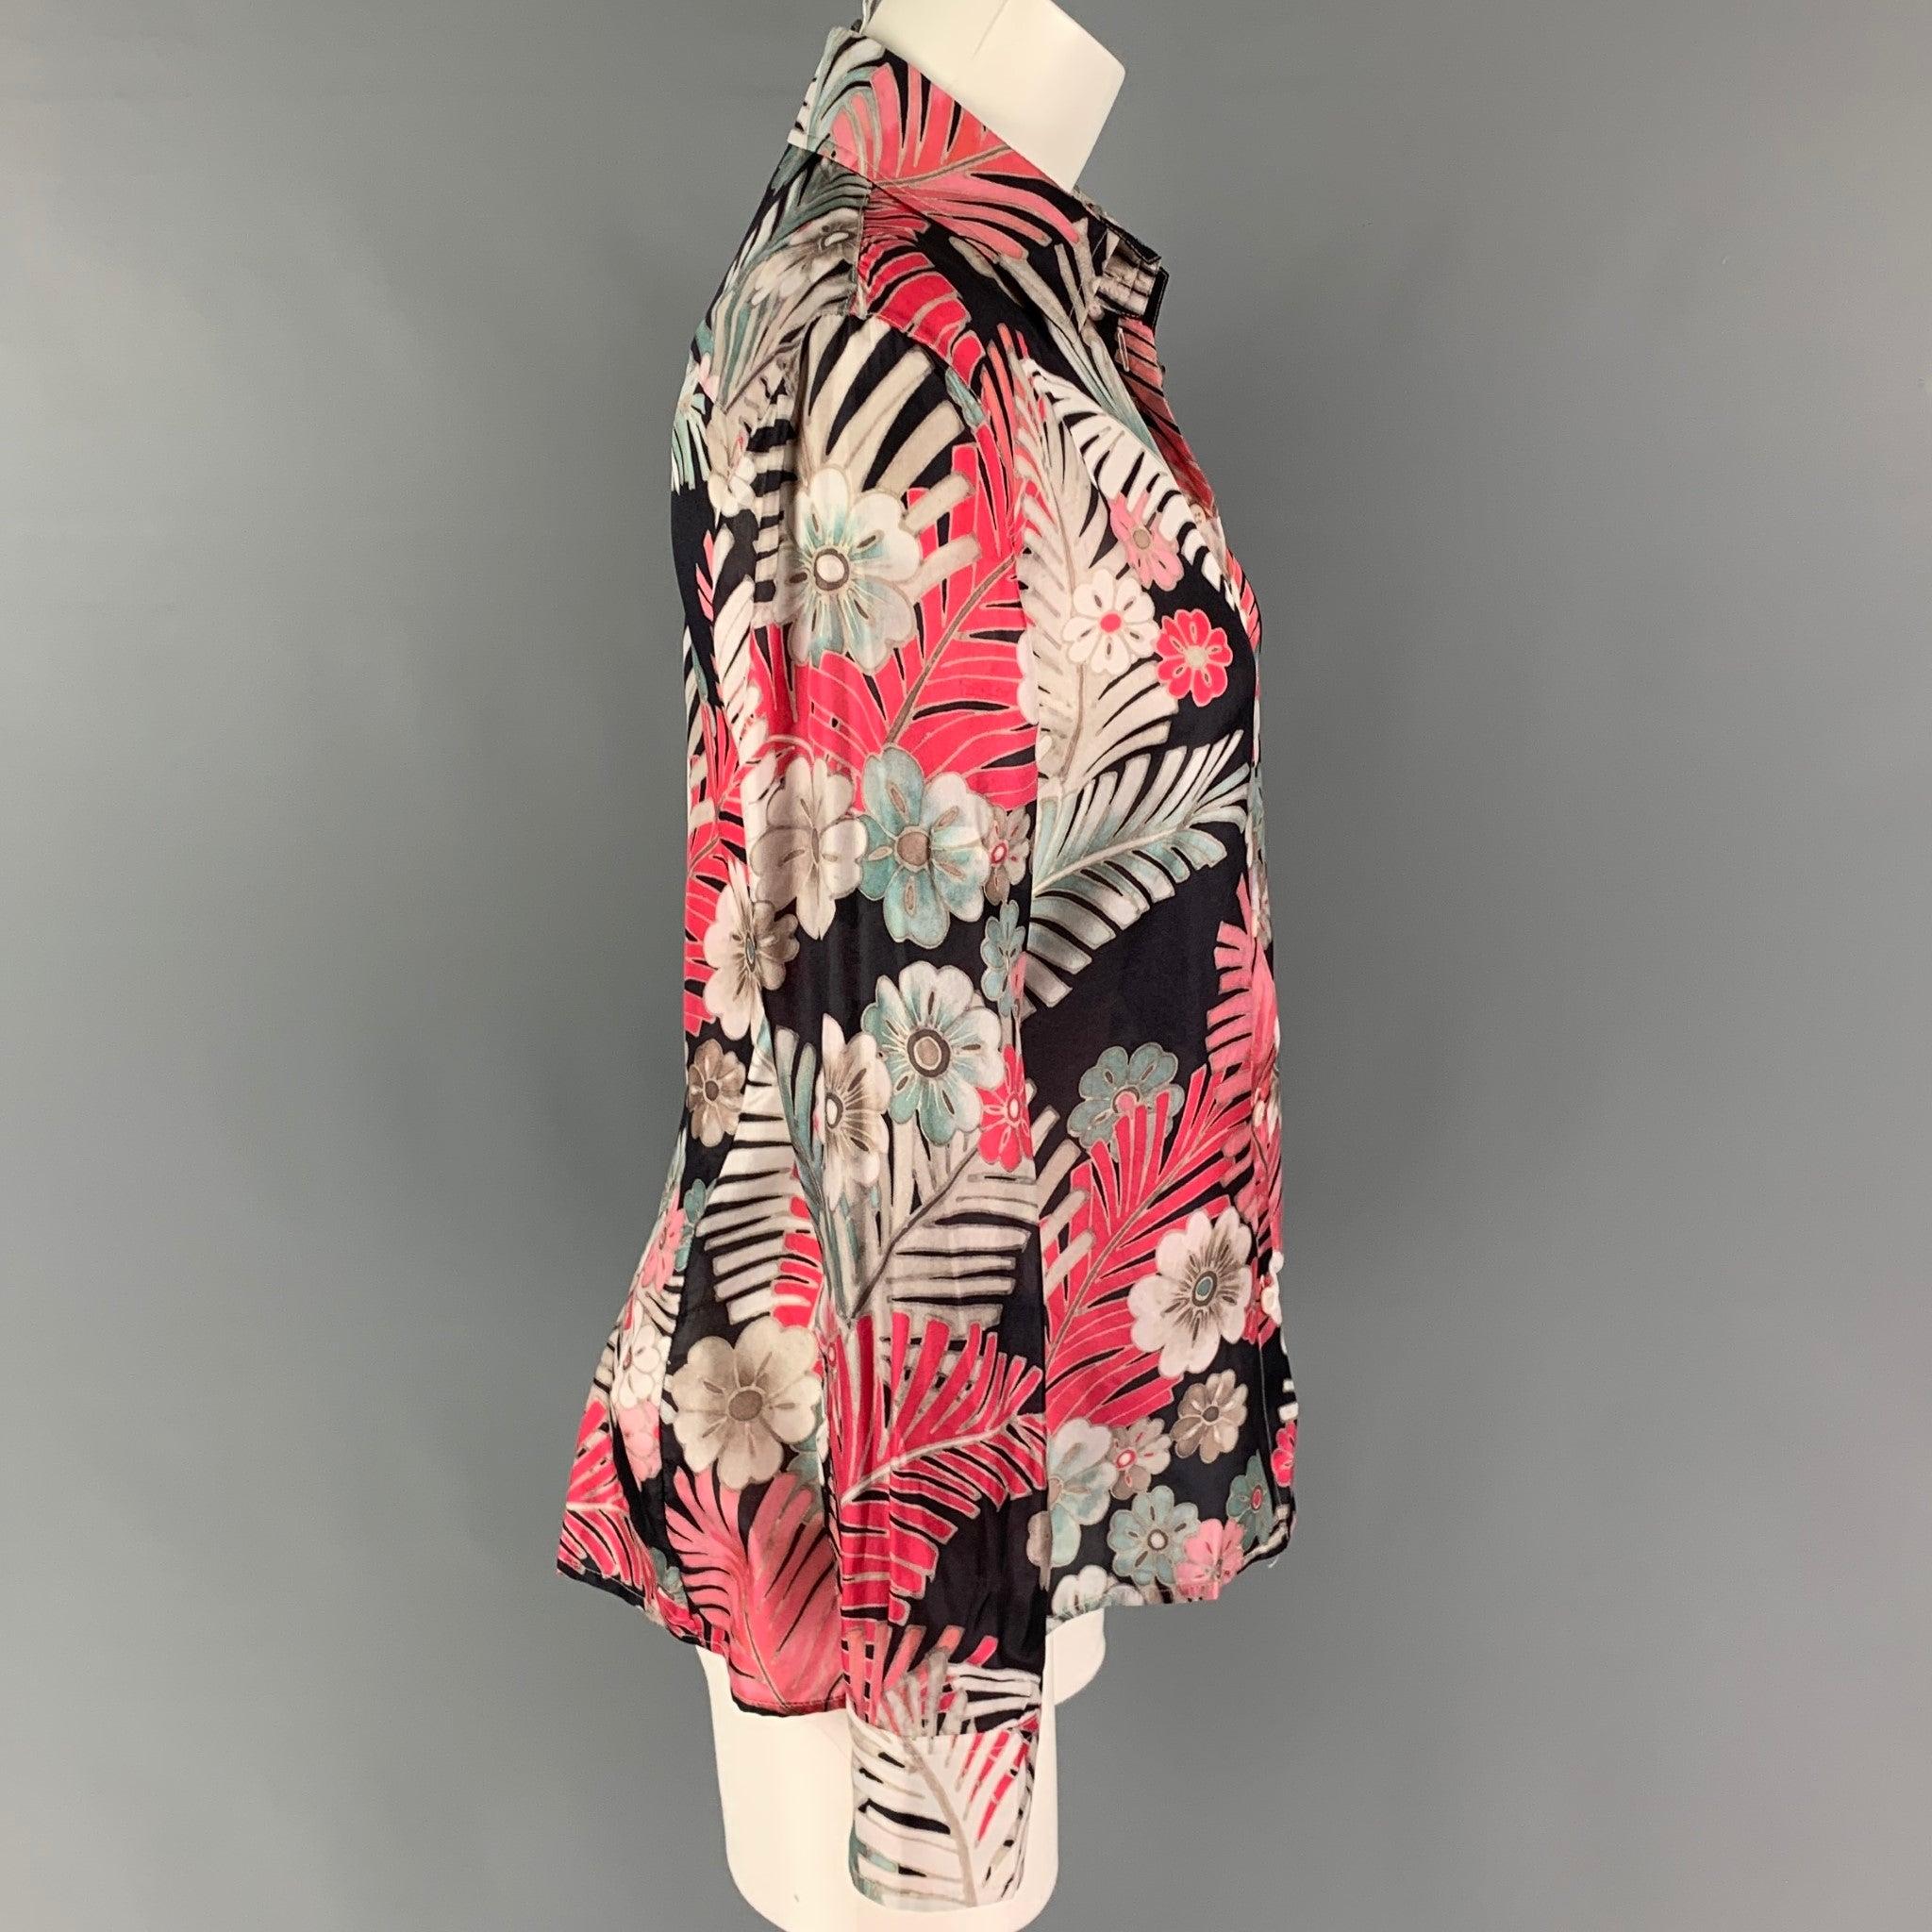 ARMANI COLLEZIONI top comes in a multi-color floral silk featuring a spread collar and a button up closure.
Very Good
Pre-Owned Condition. 

Marked:   6 

Measurements: 
 
Shoulder: 16 inches  Bust: 36 inches Sleeve: 24 inches  Length: 25 inches 
 